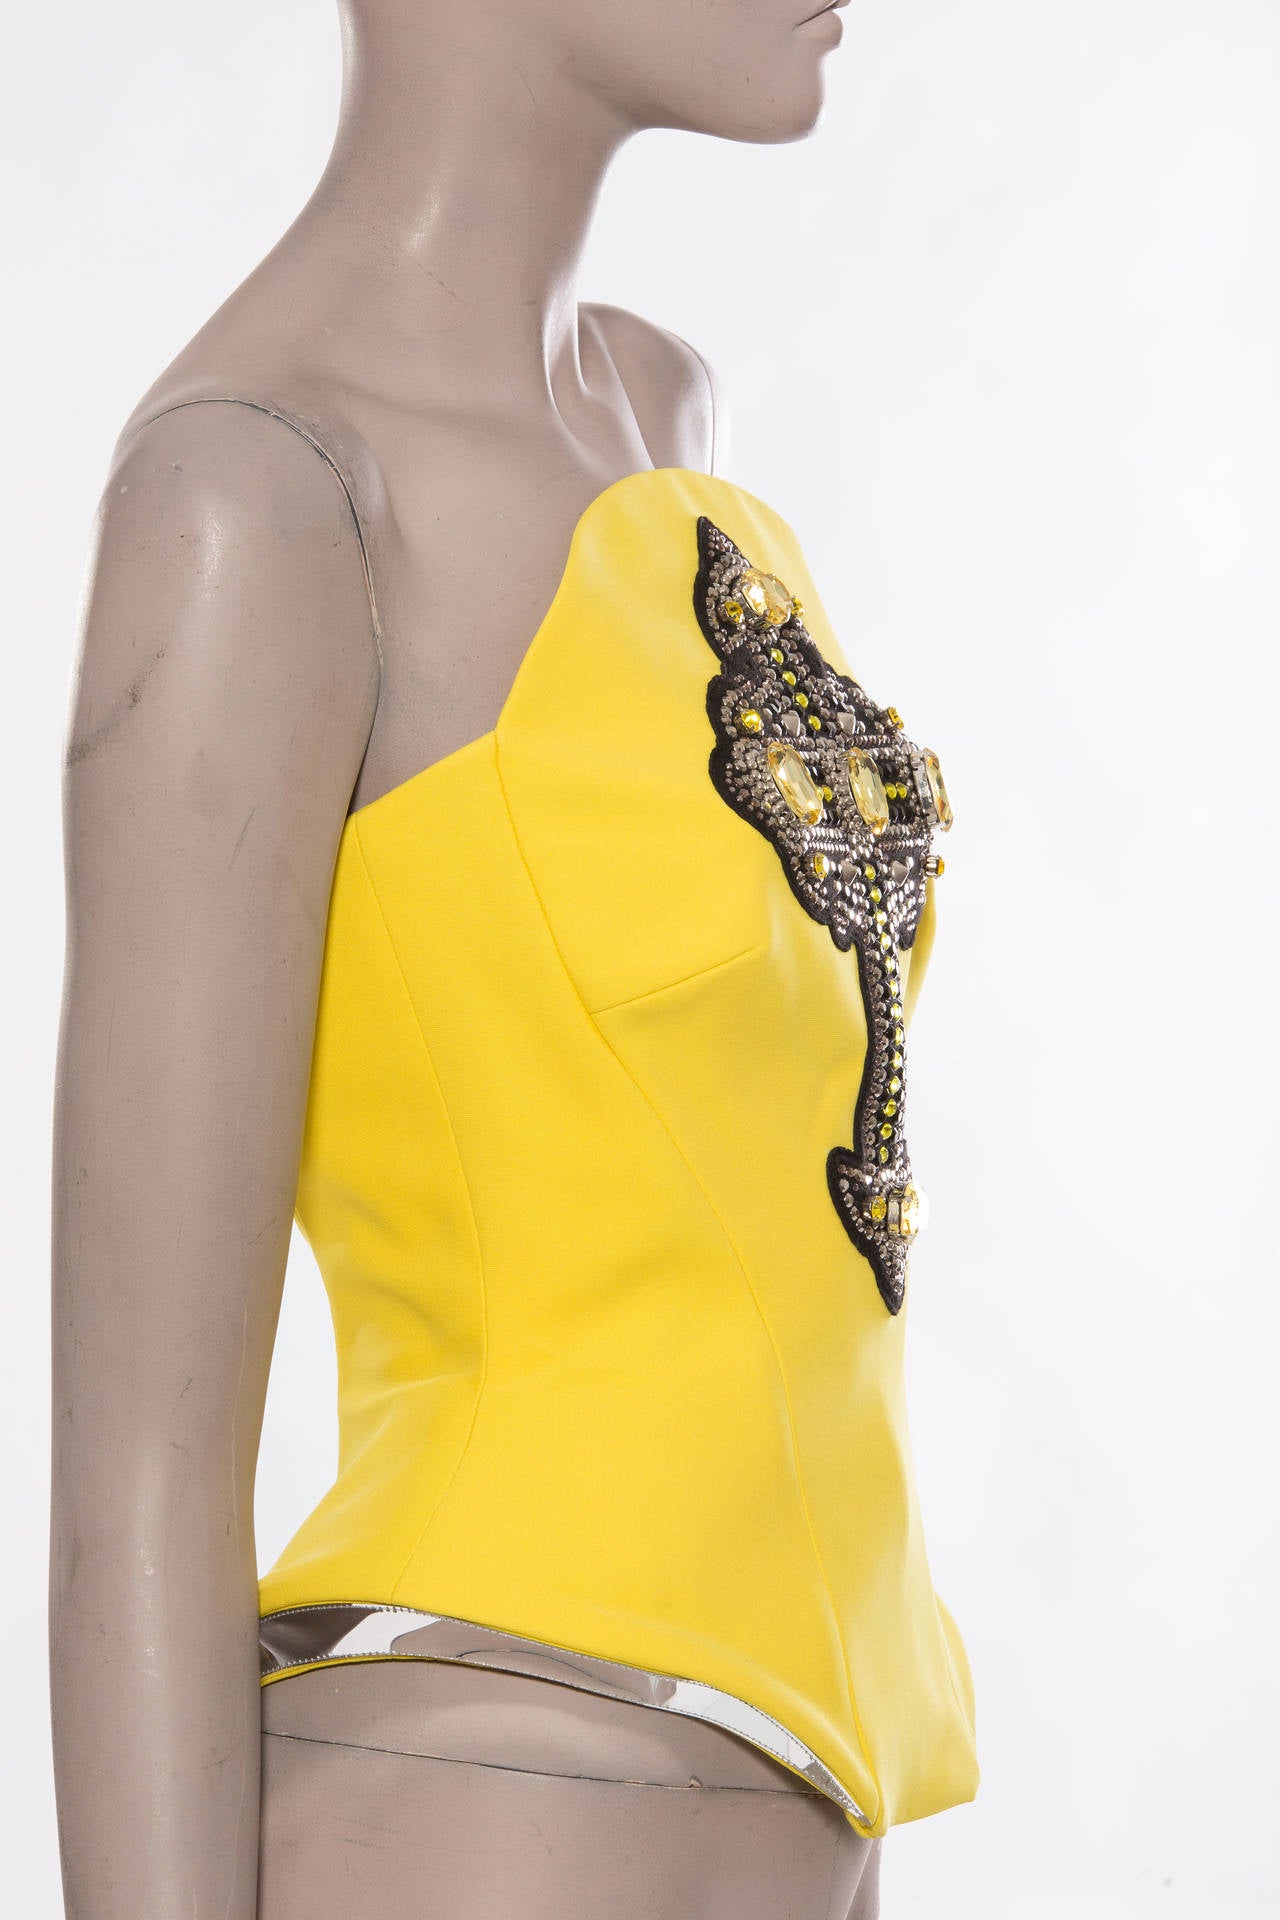 Versace, Autumn-Winter 2012, yellow silk structured bustier, gothic cross appliquéd with multicolor prong set Swarovski crystal embellishment, silver metallic PVC trim and concealed back zip. Includes tags.

Bust 32